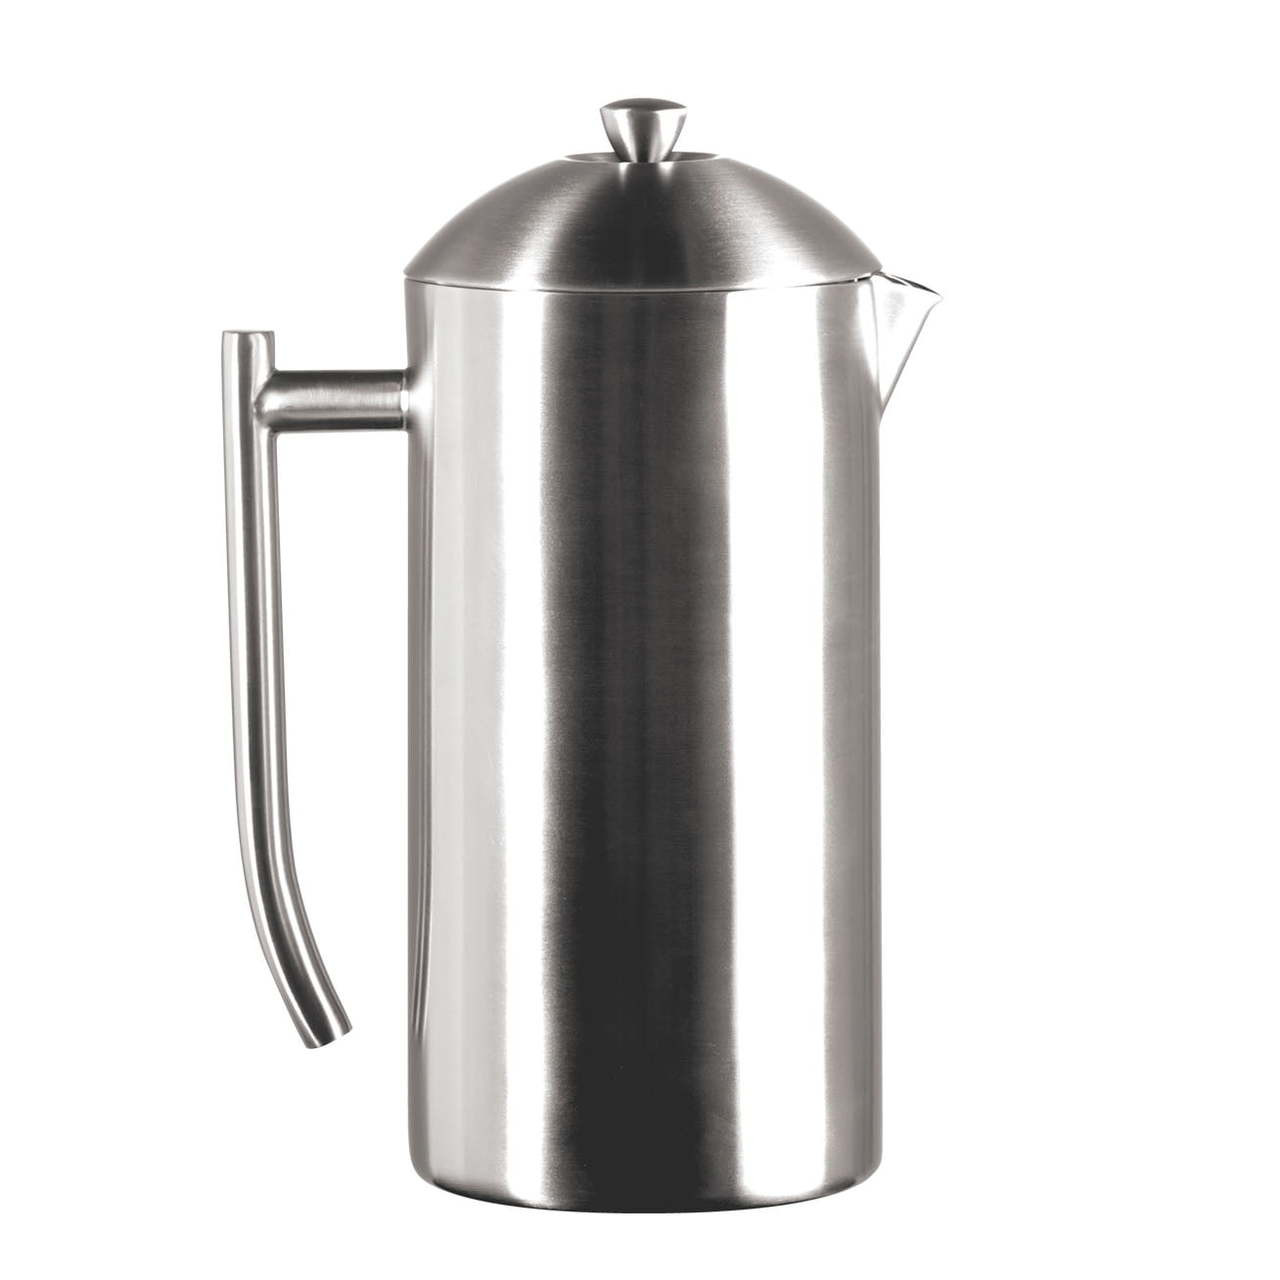 https://cdn11.bigcommerce.com/s-hccytny0od/images/stencil/1280x1280/products/1548/5450/frieling-brushed-finish-french-press-44-ounce__57946.1575063925.jpg?c=2?imbypass=on